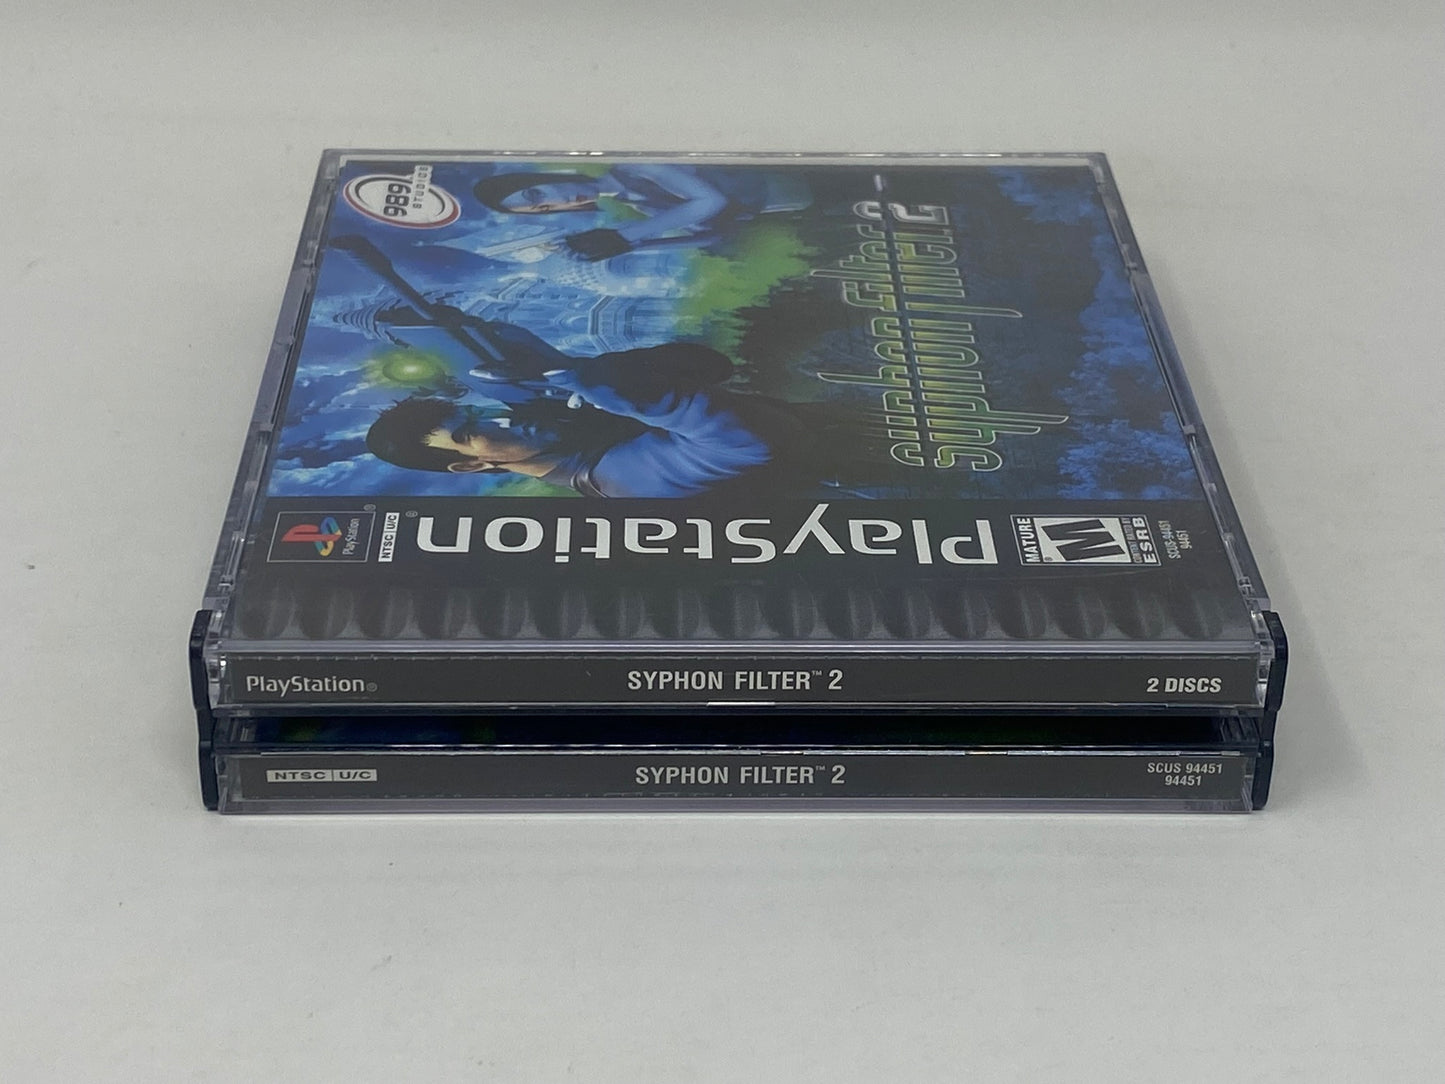 Sony PlayStation - Syphon Filter 2 - Complete